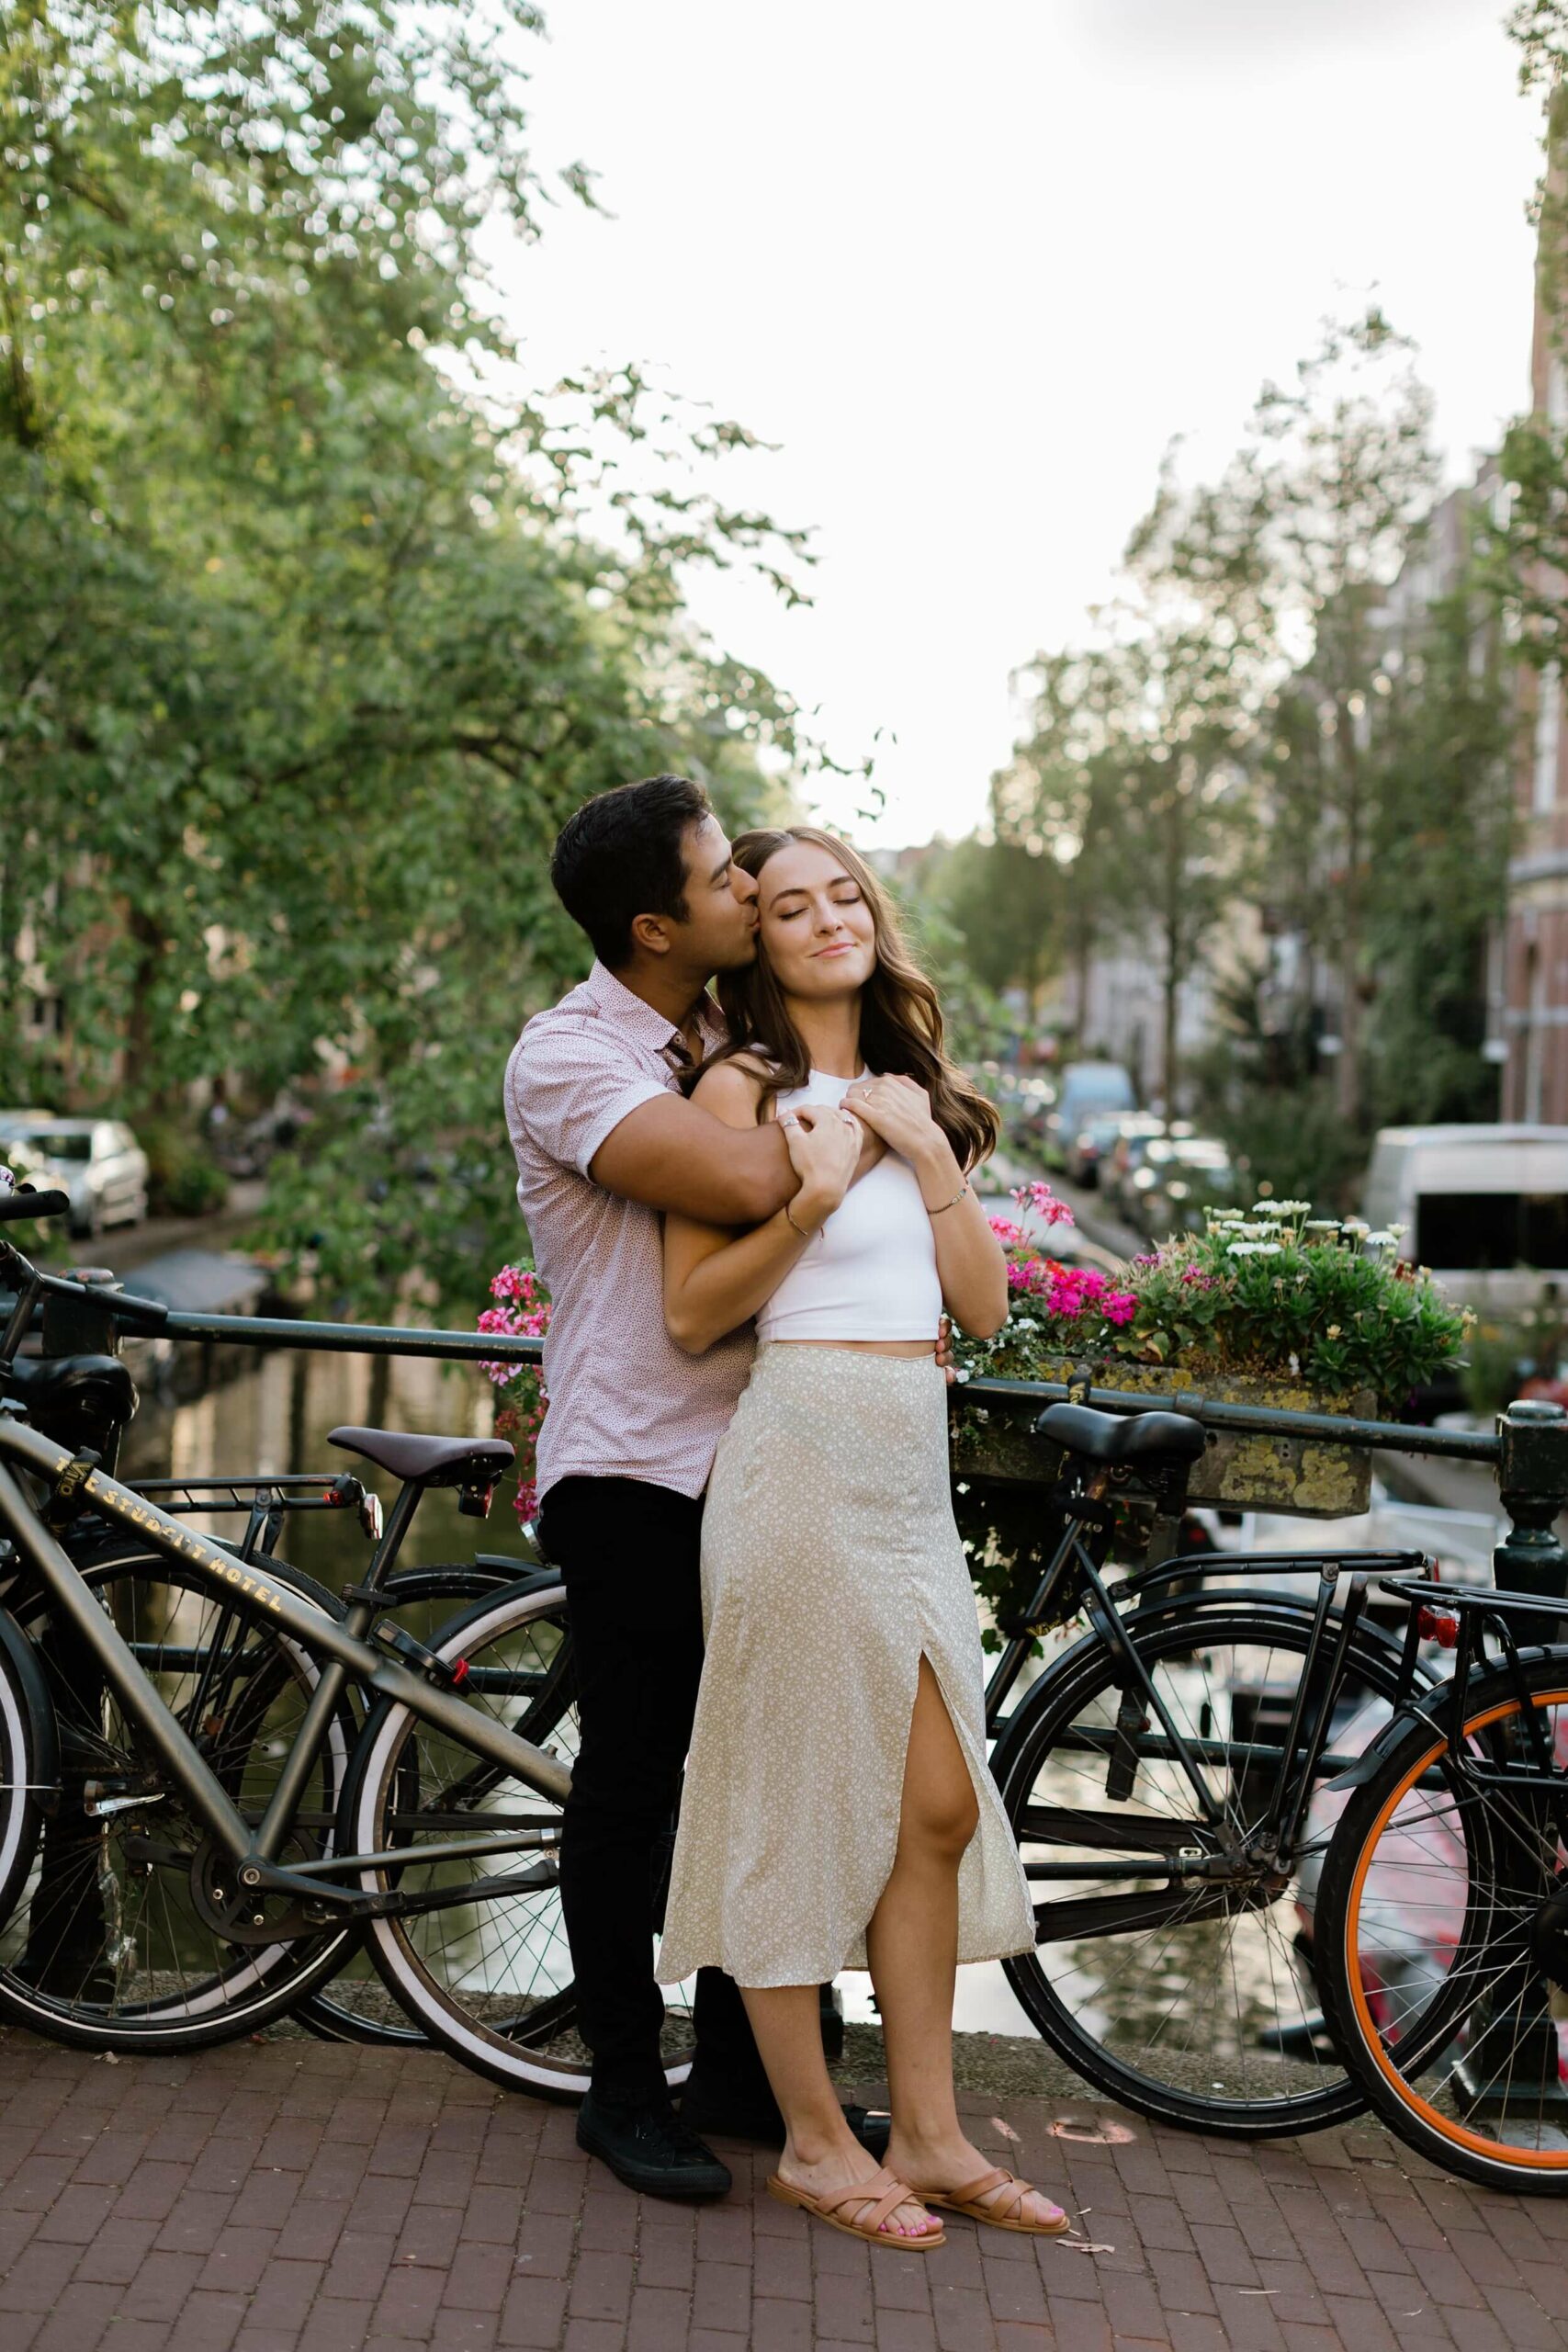 alt="tender embrace during couples engagement session in Amsterdam"